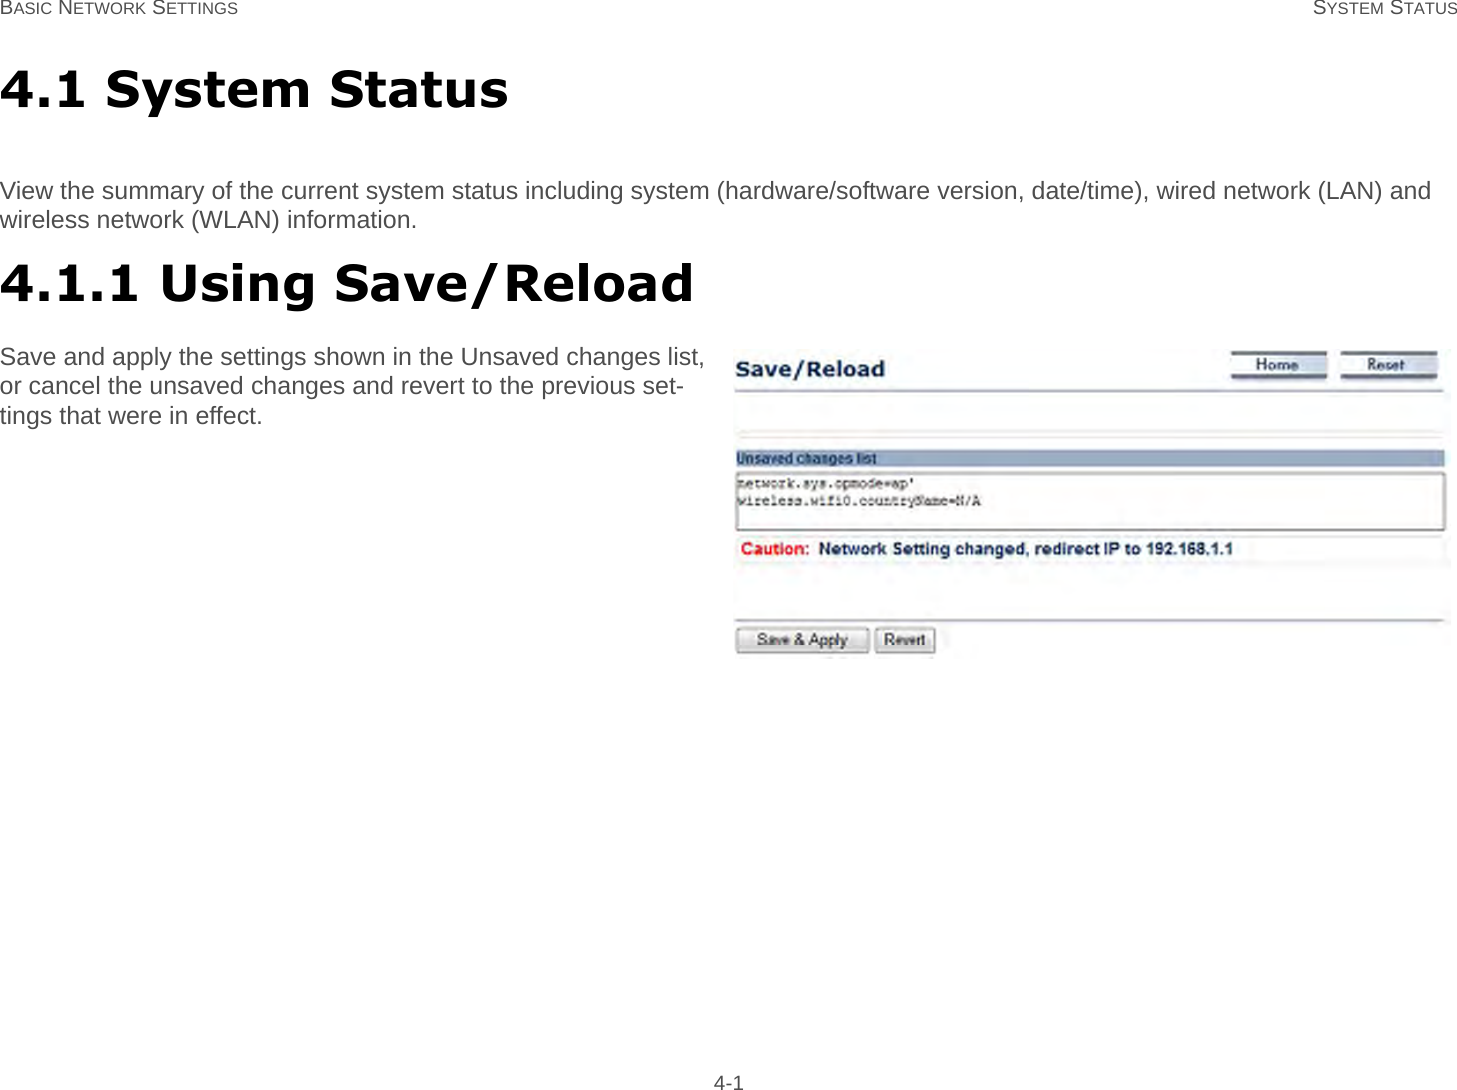 BASIC NETWORK SETTINGS SYSTEM STATUS 4-14.1 System StatusView the summary of the current system status including system (hardware/software version, date/time), wired network (LAN) and wireless network (WLAN) information.4.1.1 Using Save/ReloadSave and apply the settings shown in the Unsaved changes list, or cancel the unsaved changes and revert to the previous set-tings that were in effect.